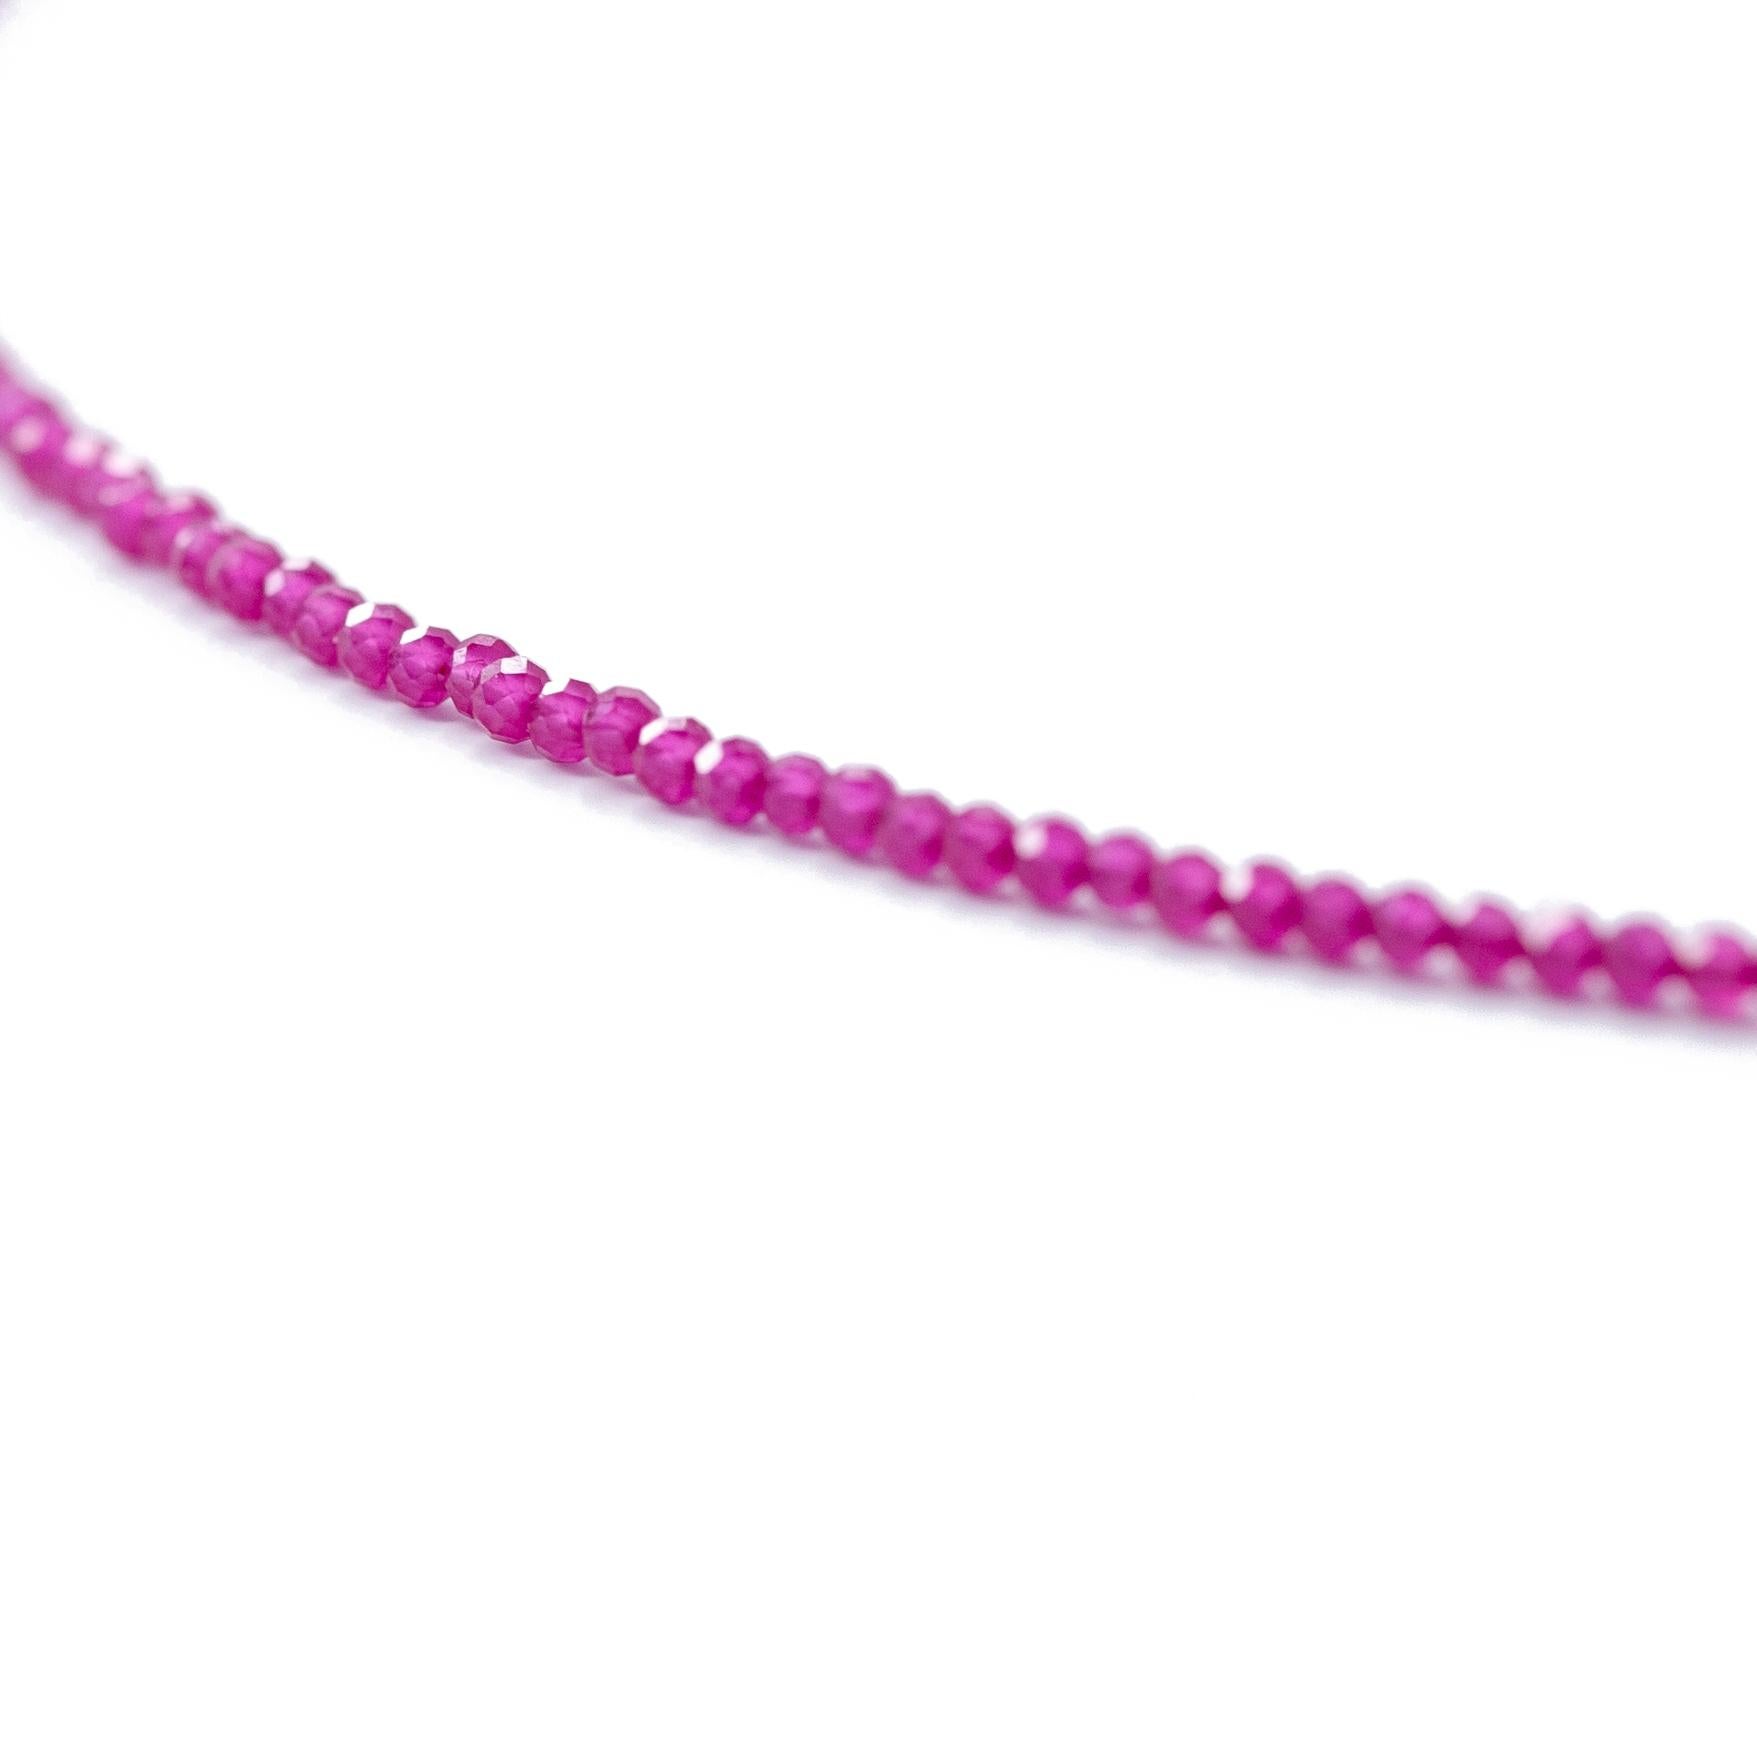 This handmade Tiny Ruby Necklace will make you feel effortlessly elegant and uniquely special, adding a touch of sparkle and timeless sophistication to your every moment. It's the perfect pop of color to elevate your favorite casual outfits. 

* 16